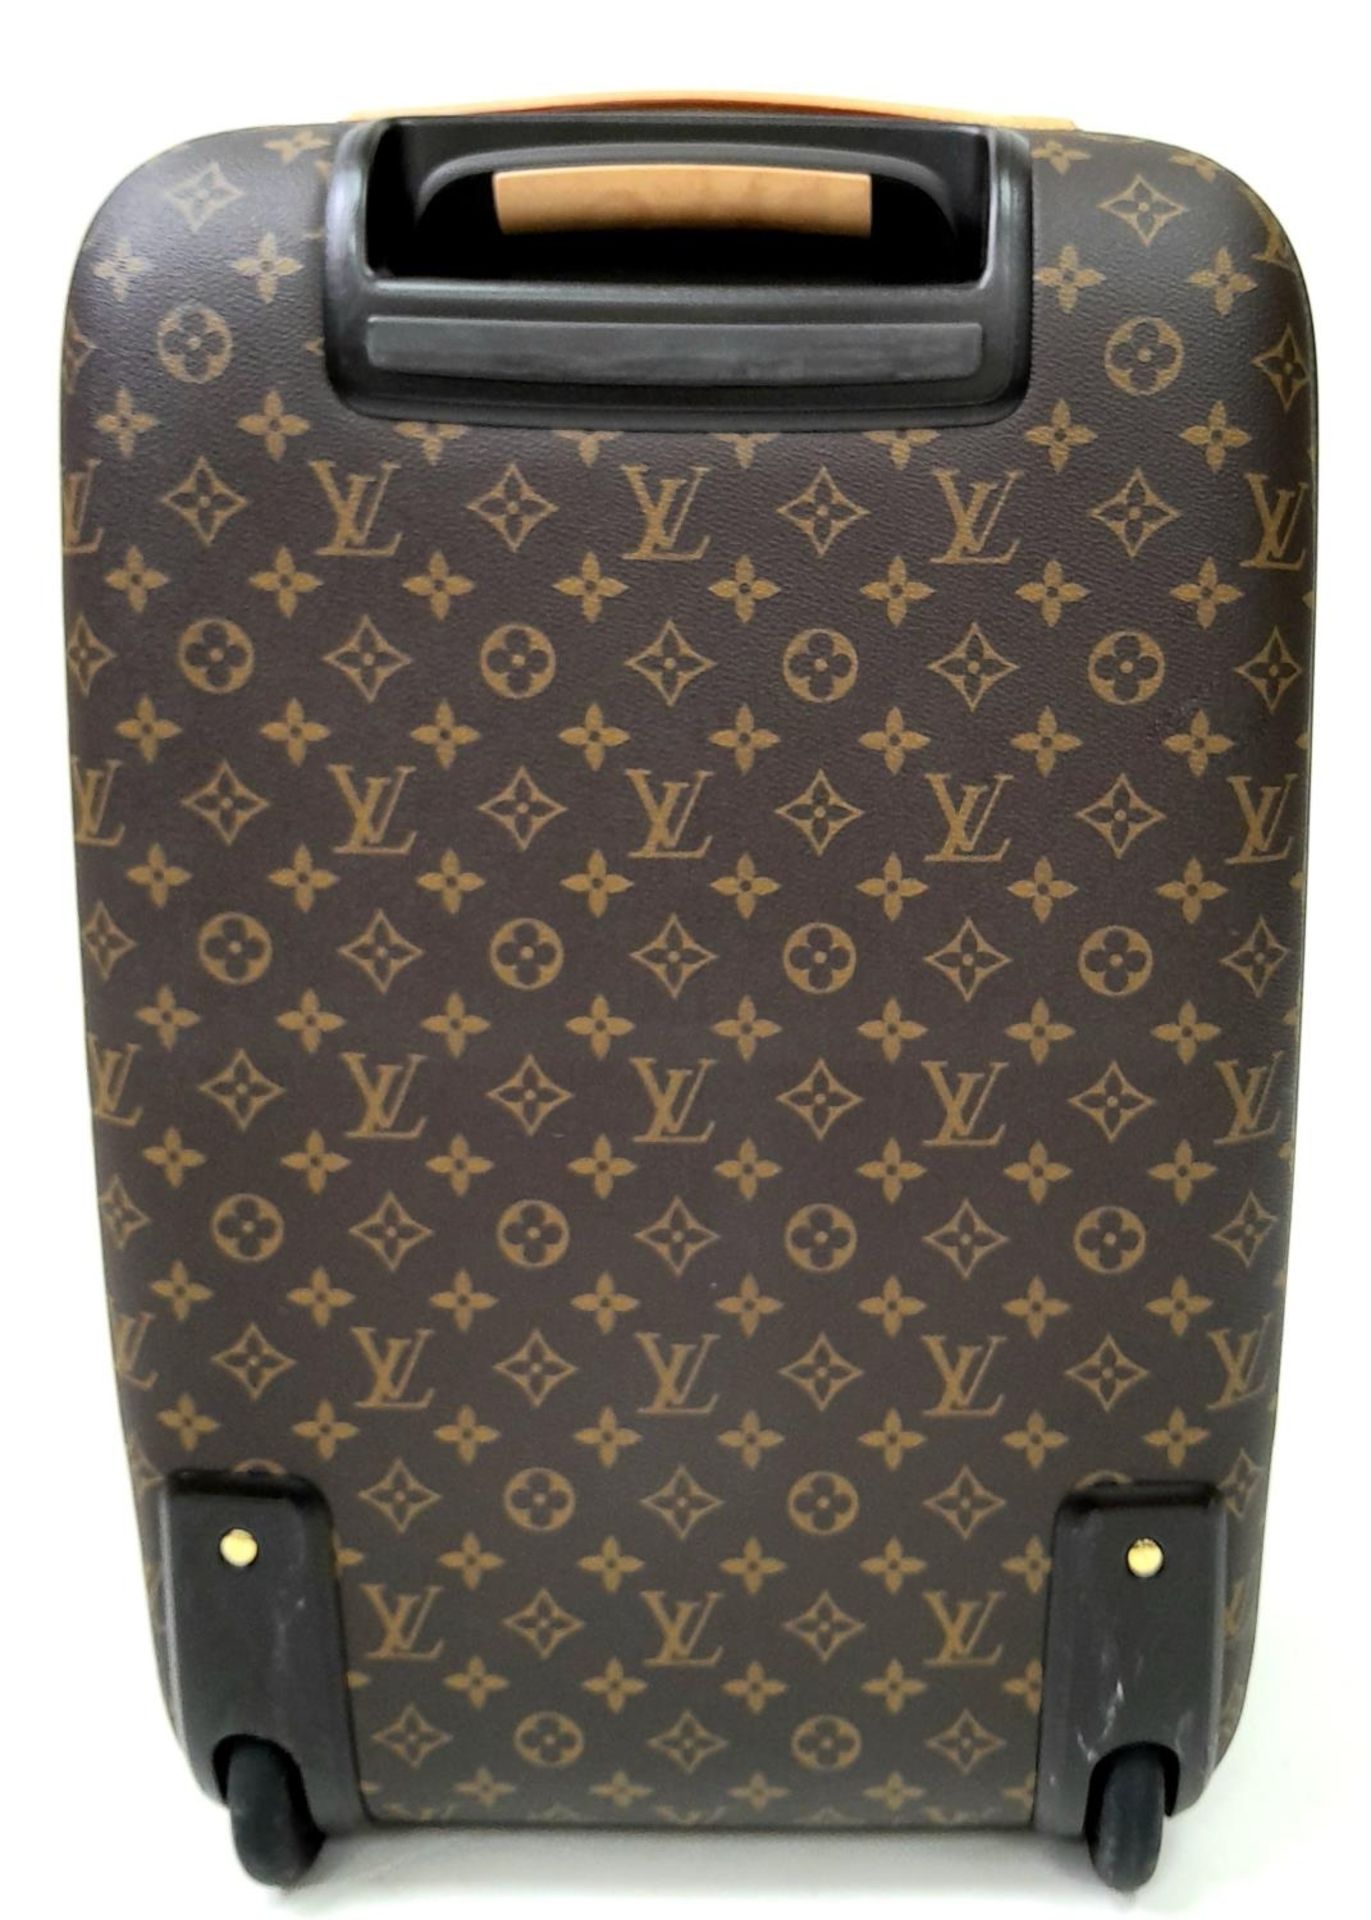 A Louis Vuitton Monogram Pegase Suitcase. Durable leather exterior with gold-toned hardware. Front - Image 3 of 16